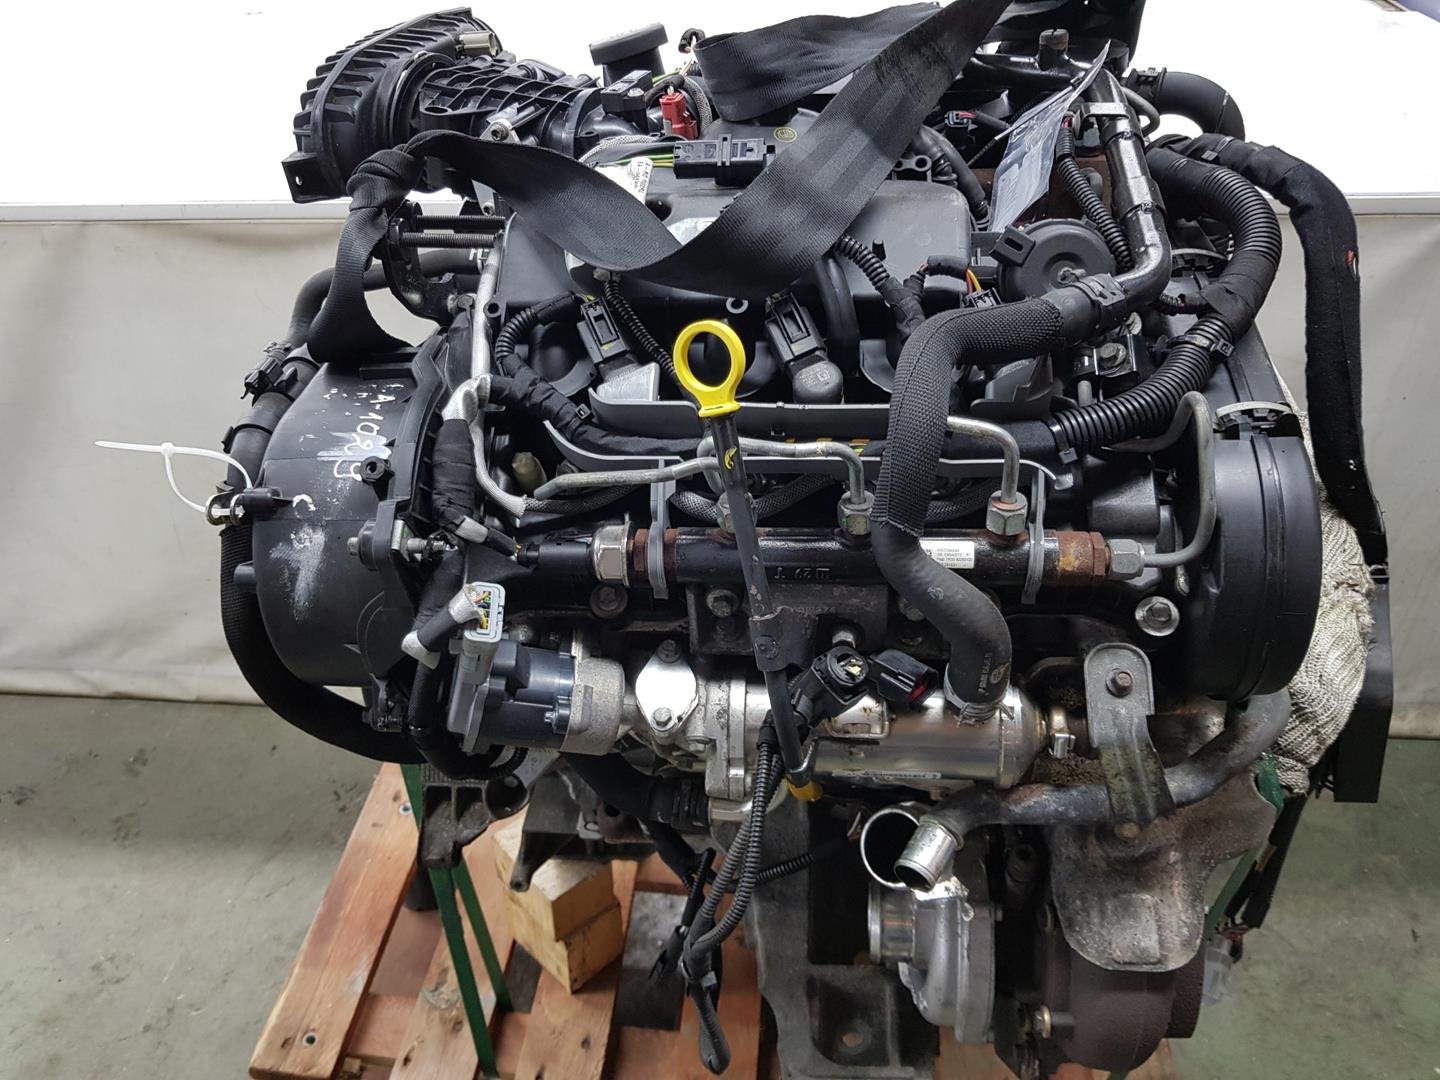 LAND ROVER Discovery 4 generation (2009-2016) Engine 276DT, LR013486, 2223MHAH2Q6006AA 22327003